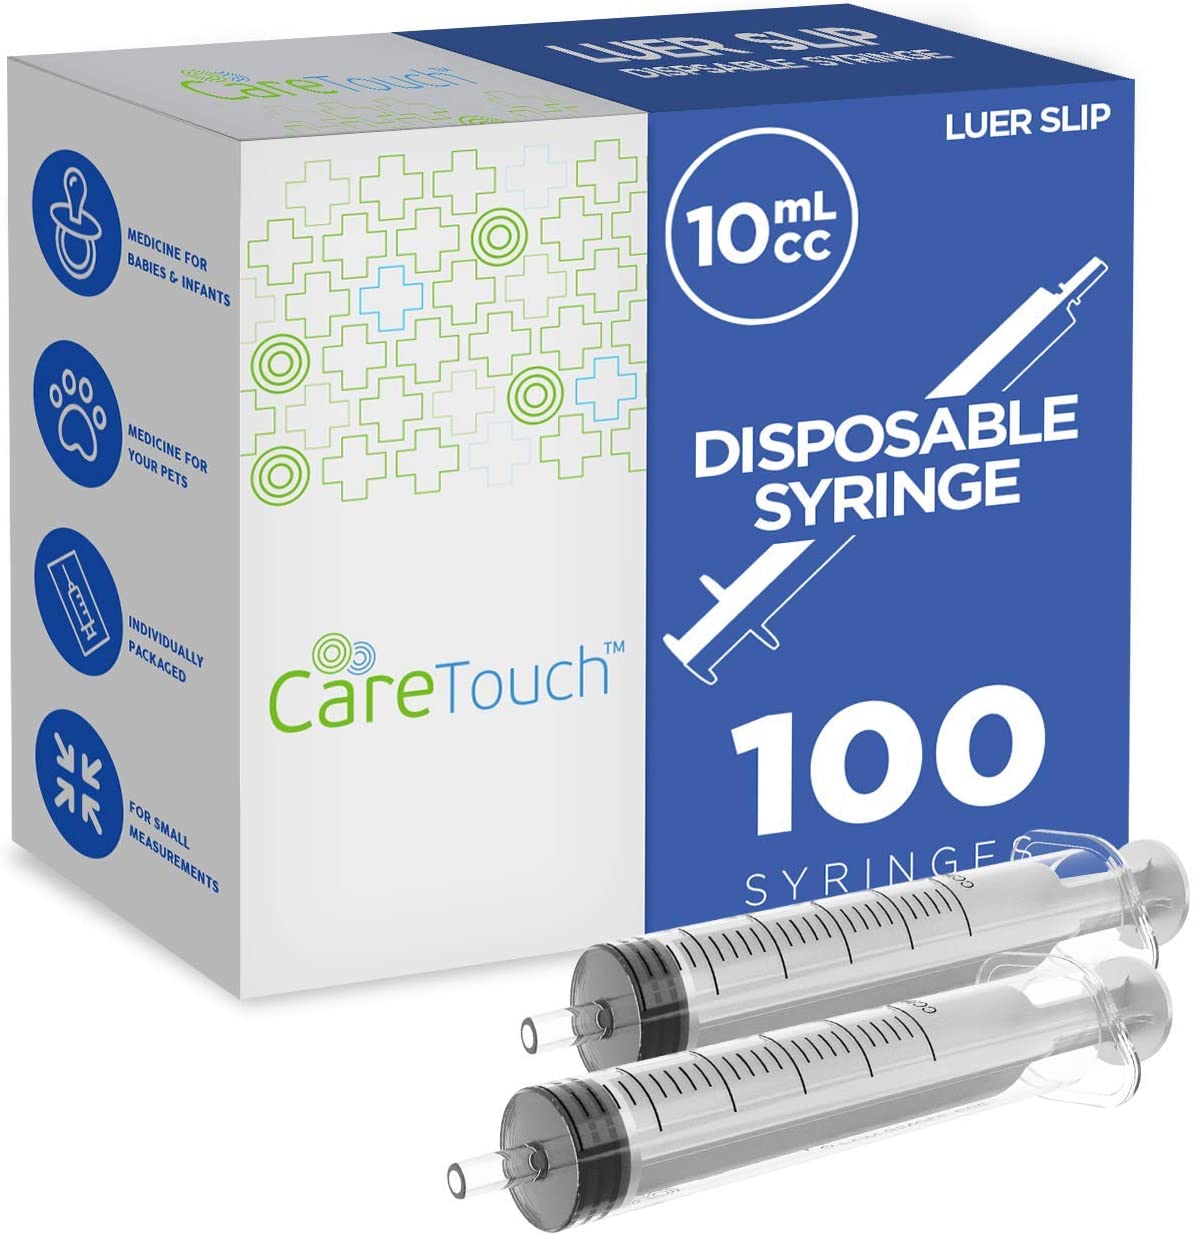 Care Touch Syringe with Luer Slip Tip - 10ml 100 Sterile Syringes (No needle) (Case of 6 units)